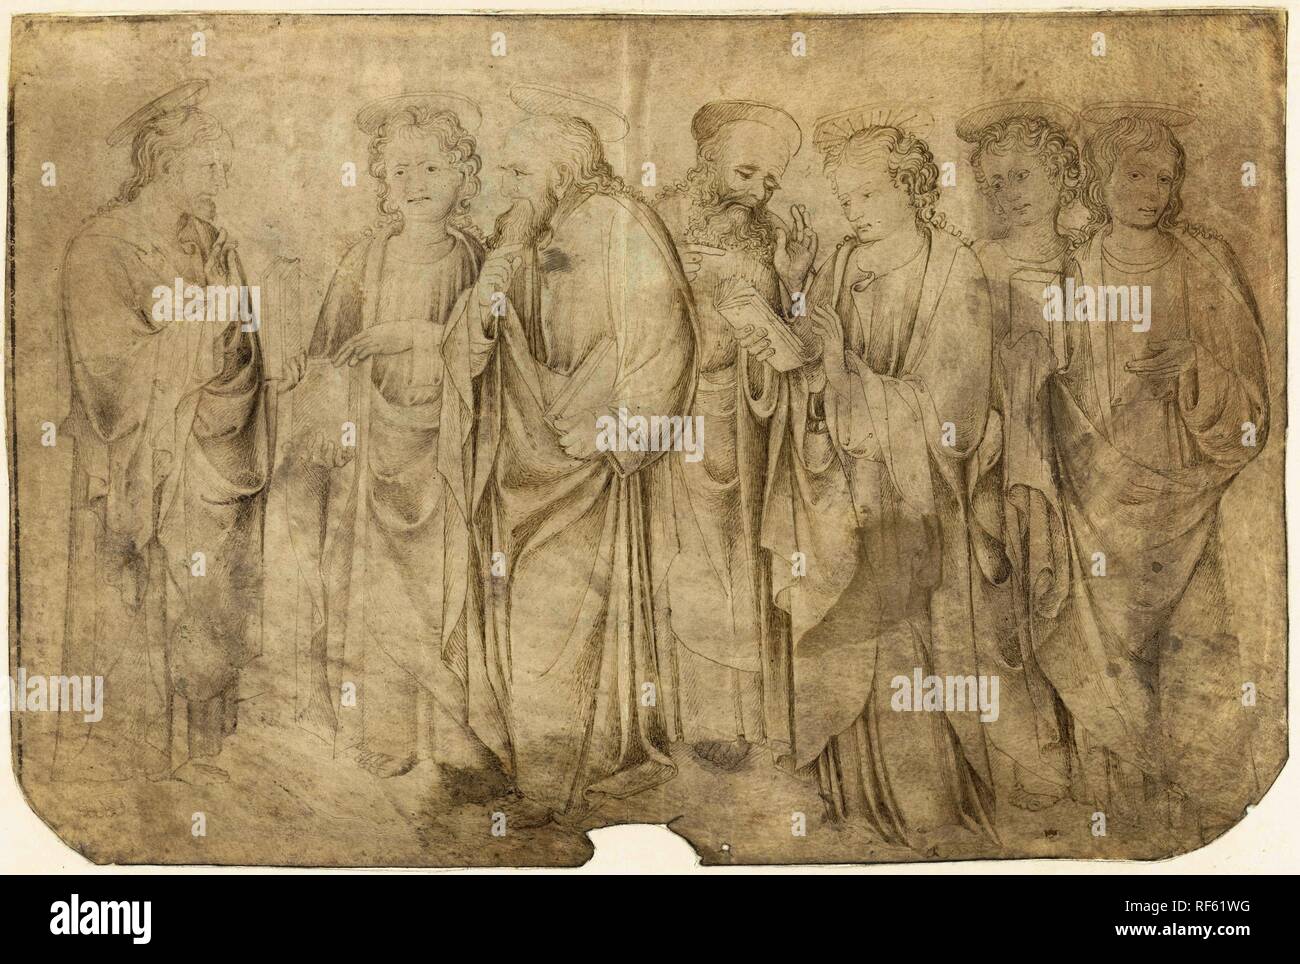 Christ and six apostles. Draughtsman: anonymous. Dating: c. 1400 - c. 1500. Measurements: h 141 mm × w 212 mm. Museum: Rijksmuseum, Amsterdam. Stock Photo